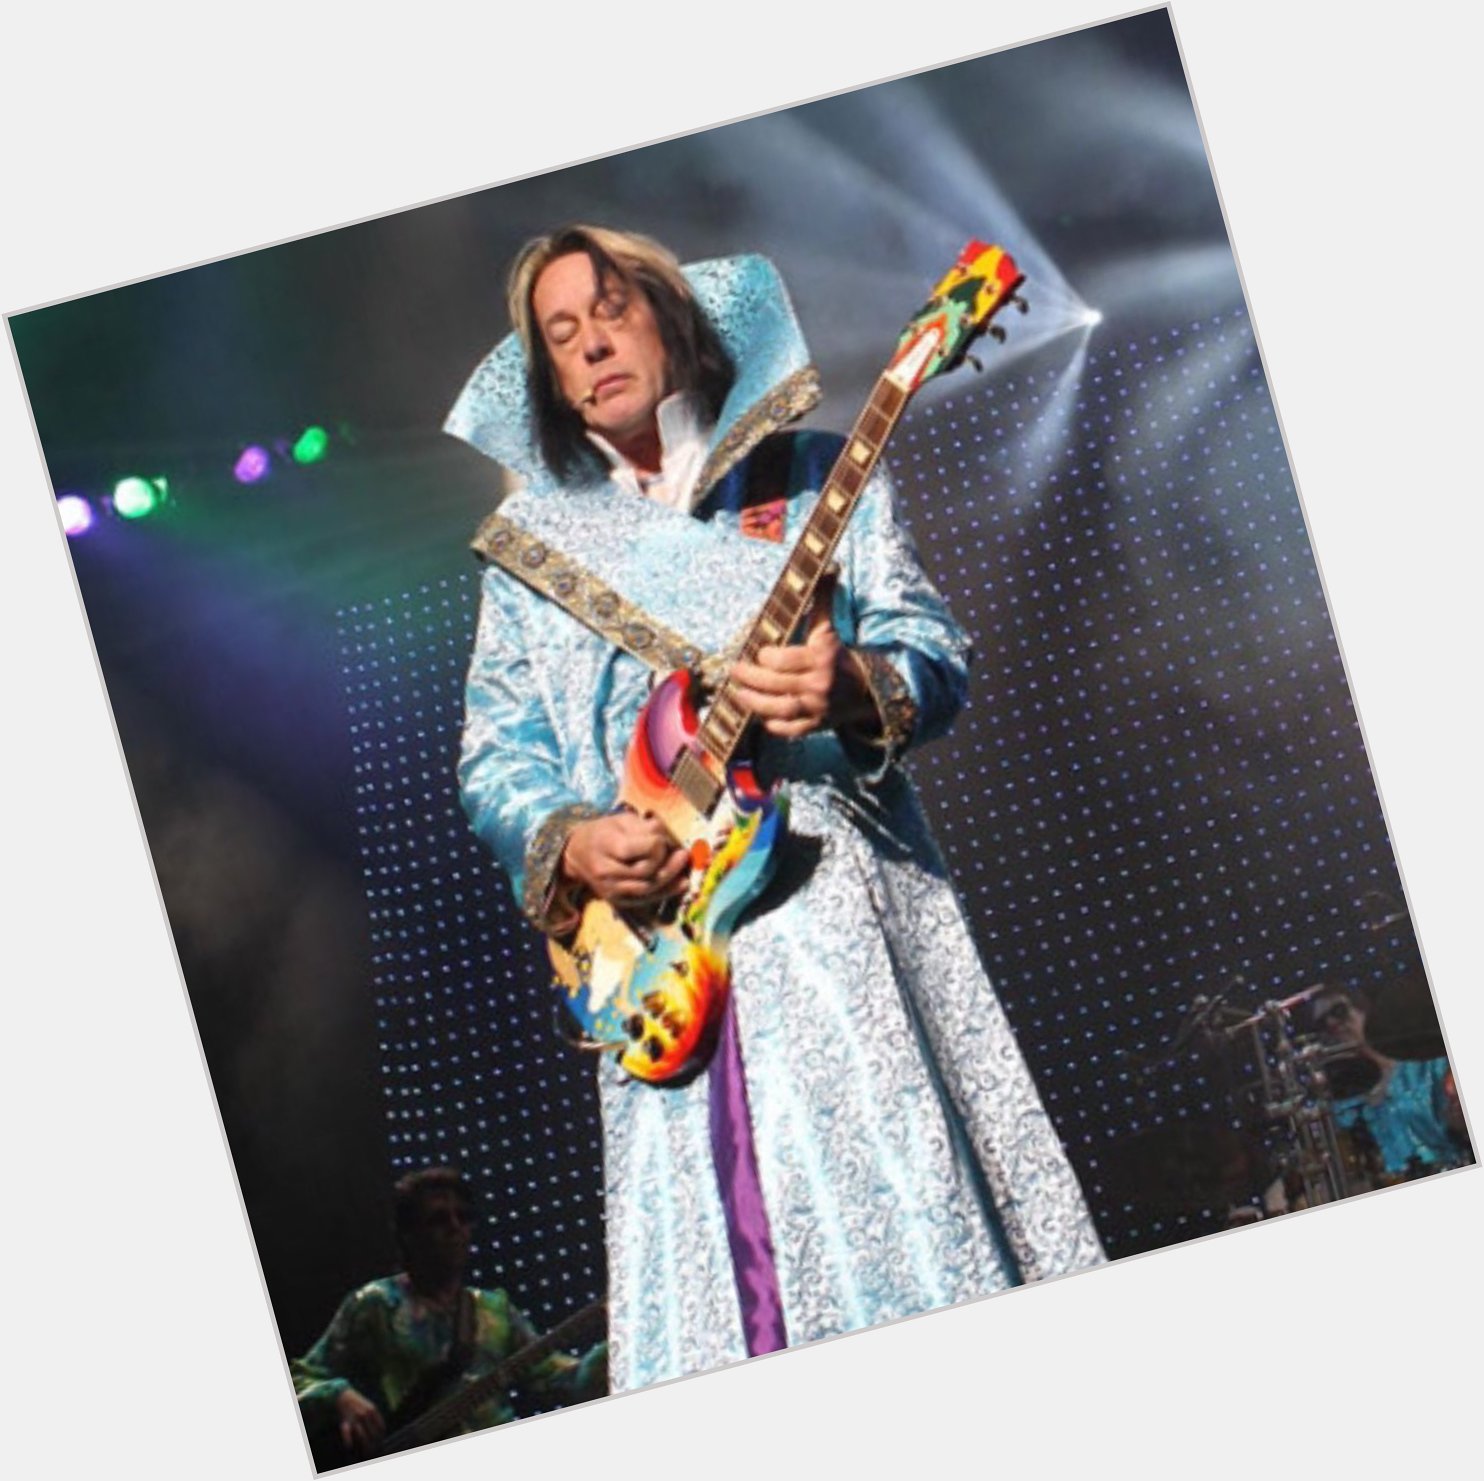 Happy birthday to the wizard known as Todd Rundgren ... never ceases to amaze and inspire me 